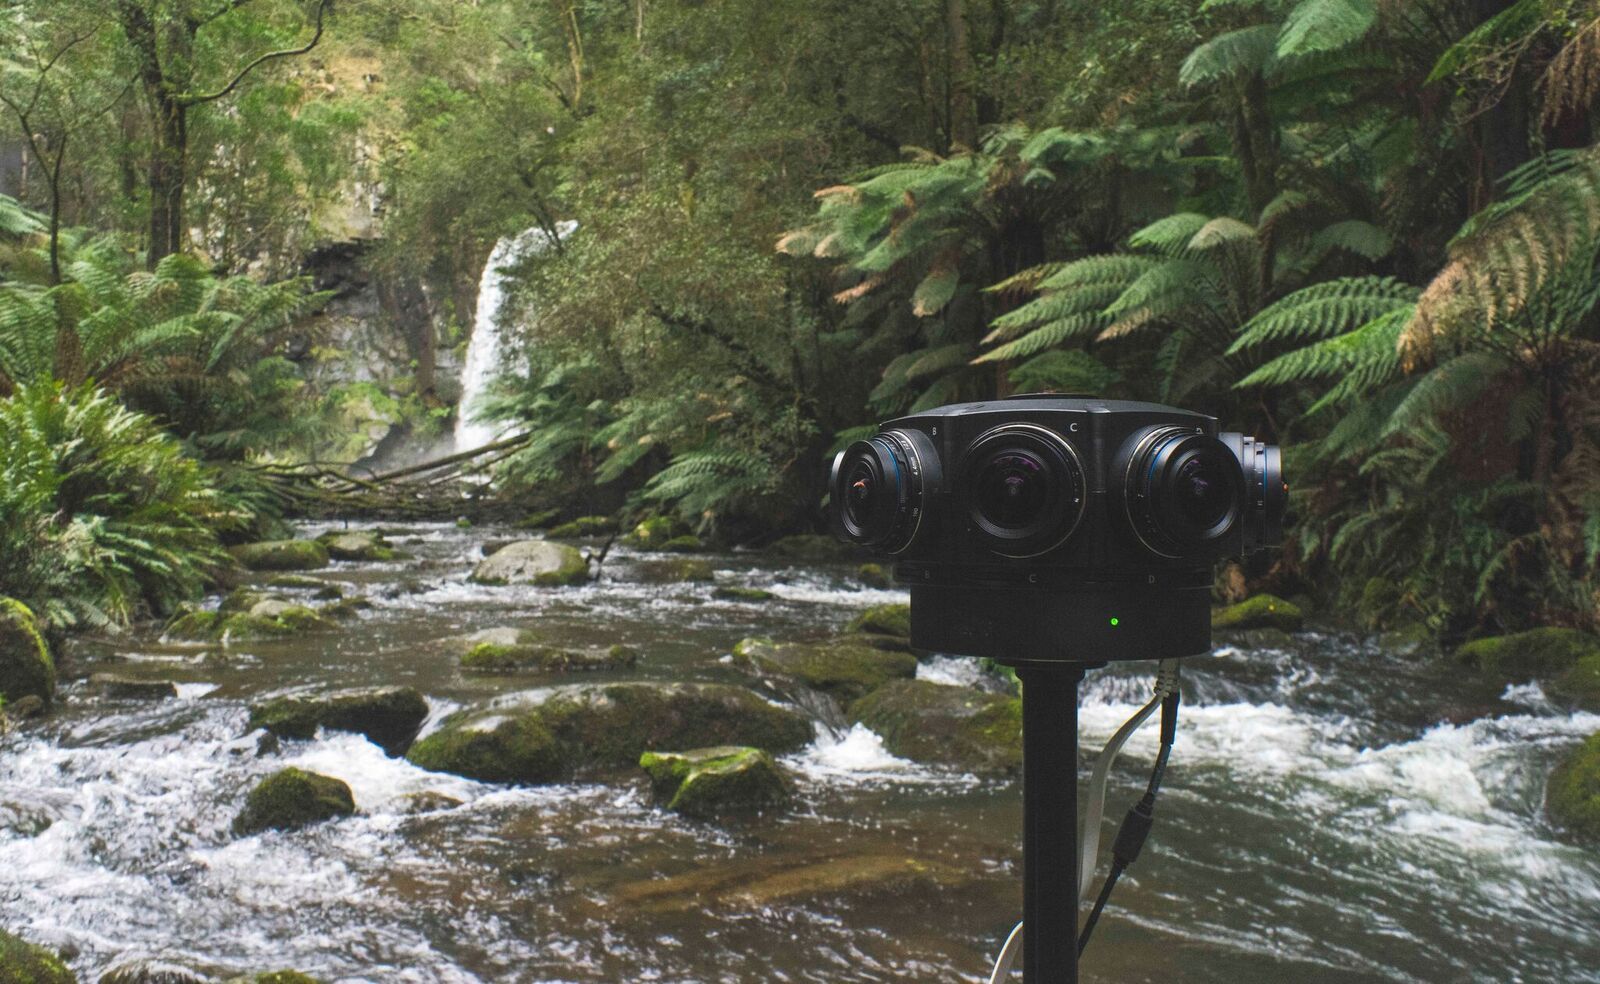 Place 360 filming for the mindfulness app - a camera with multiple lenses on a tripod next to a waterfall in The Otways